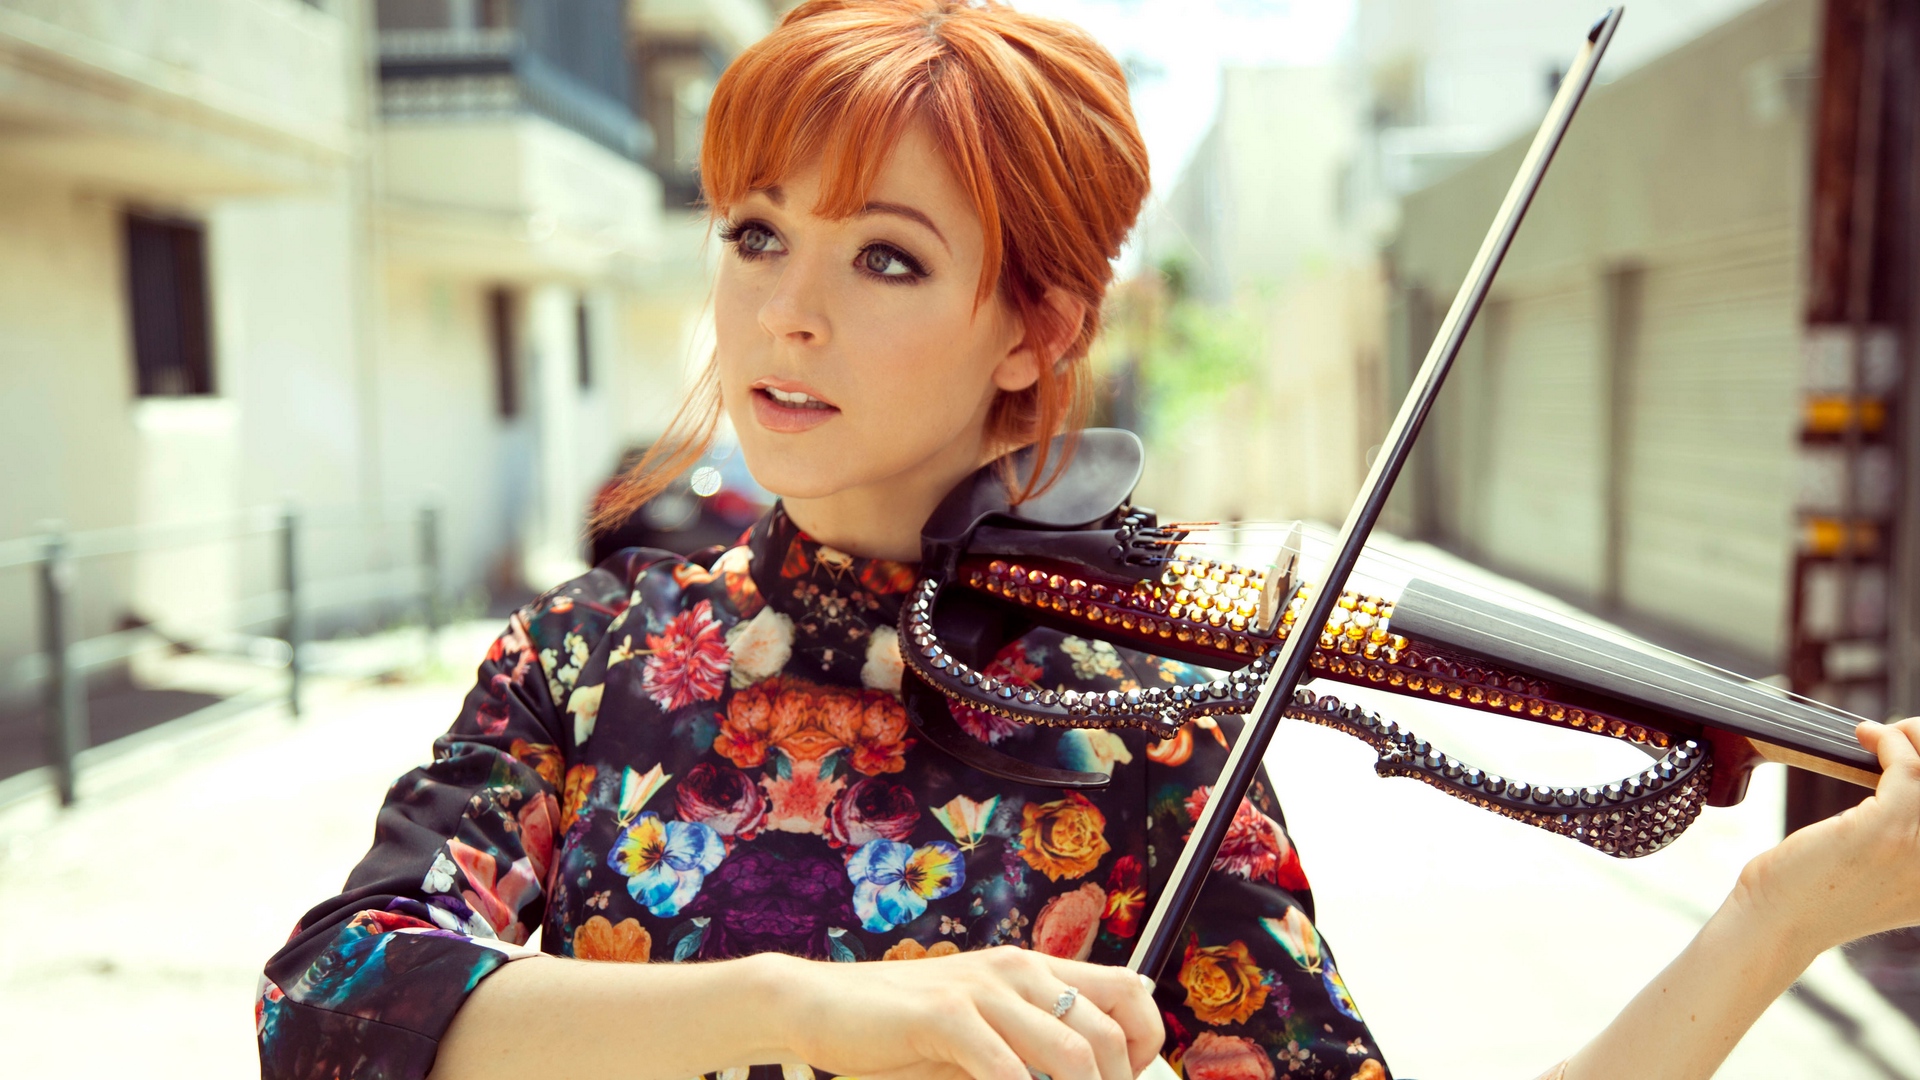 Burma Forskel Preference Top TV Song: Phantom of the Opera Medley by Lindsey Stirling - Tunefind